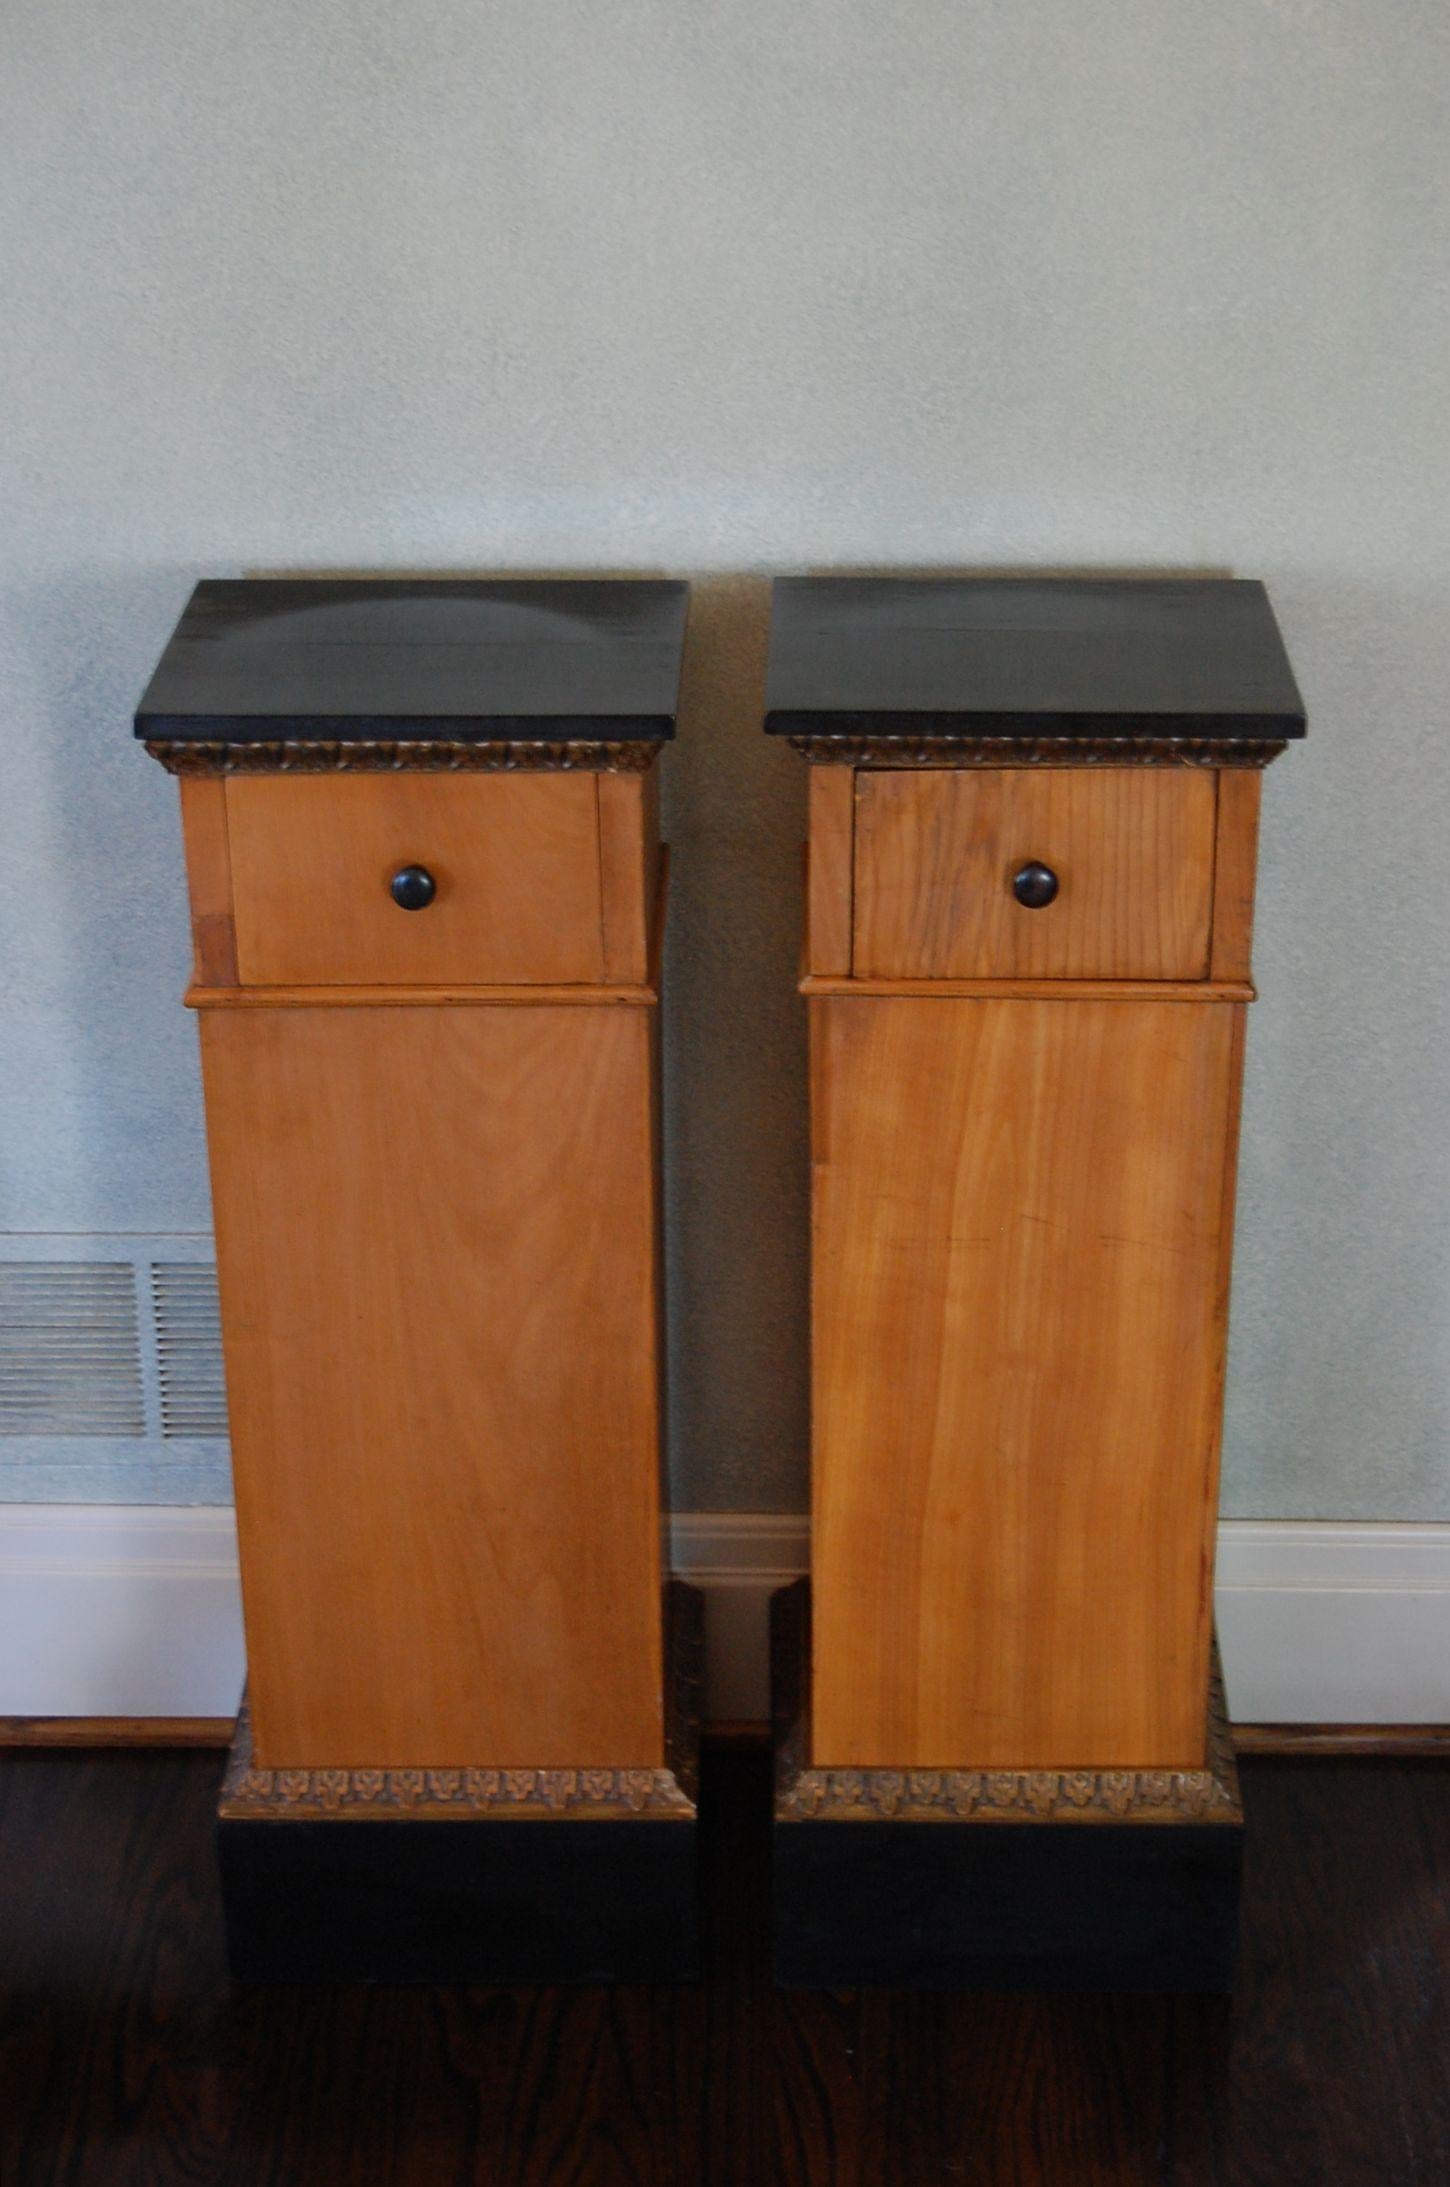 A pair of Biedermeier fruit wood stands with black lacquered tops and a single drawer, gold leaf trim along base cap, possibly French or German in origin. Parke Interiors purchased them some 50 years ago from the New Orleans residence of the late